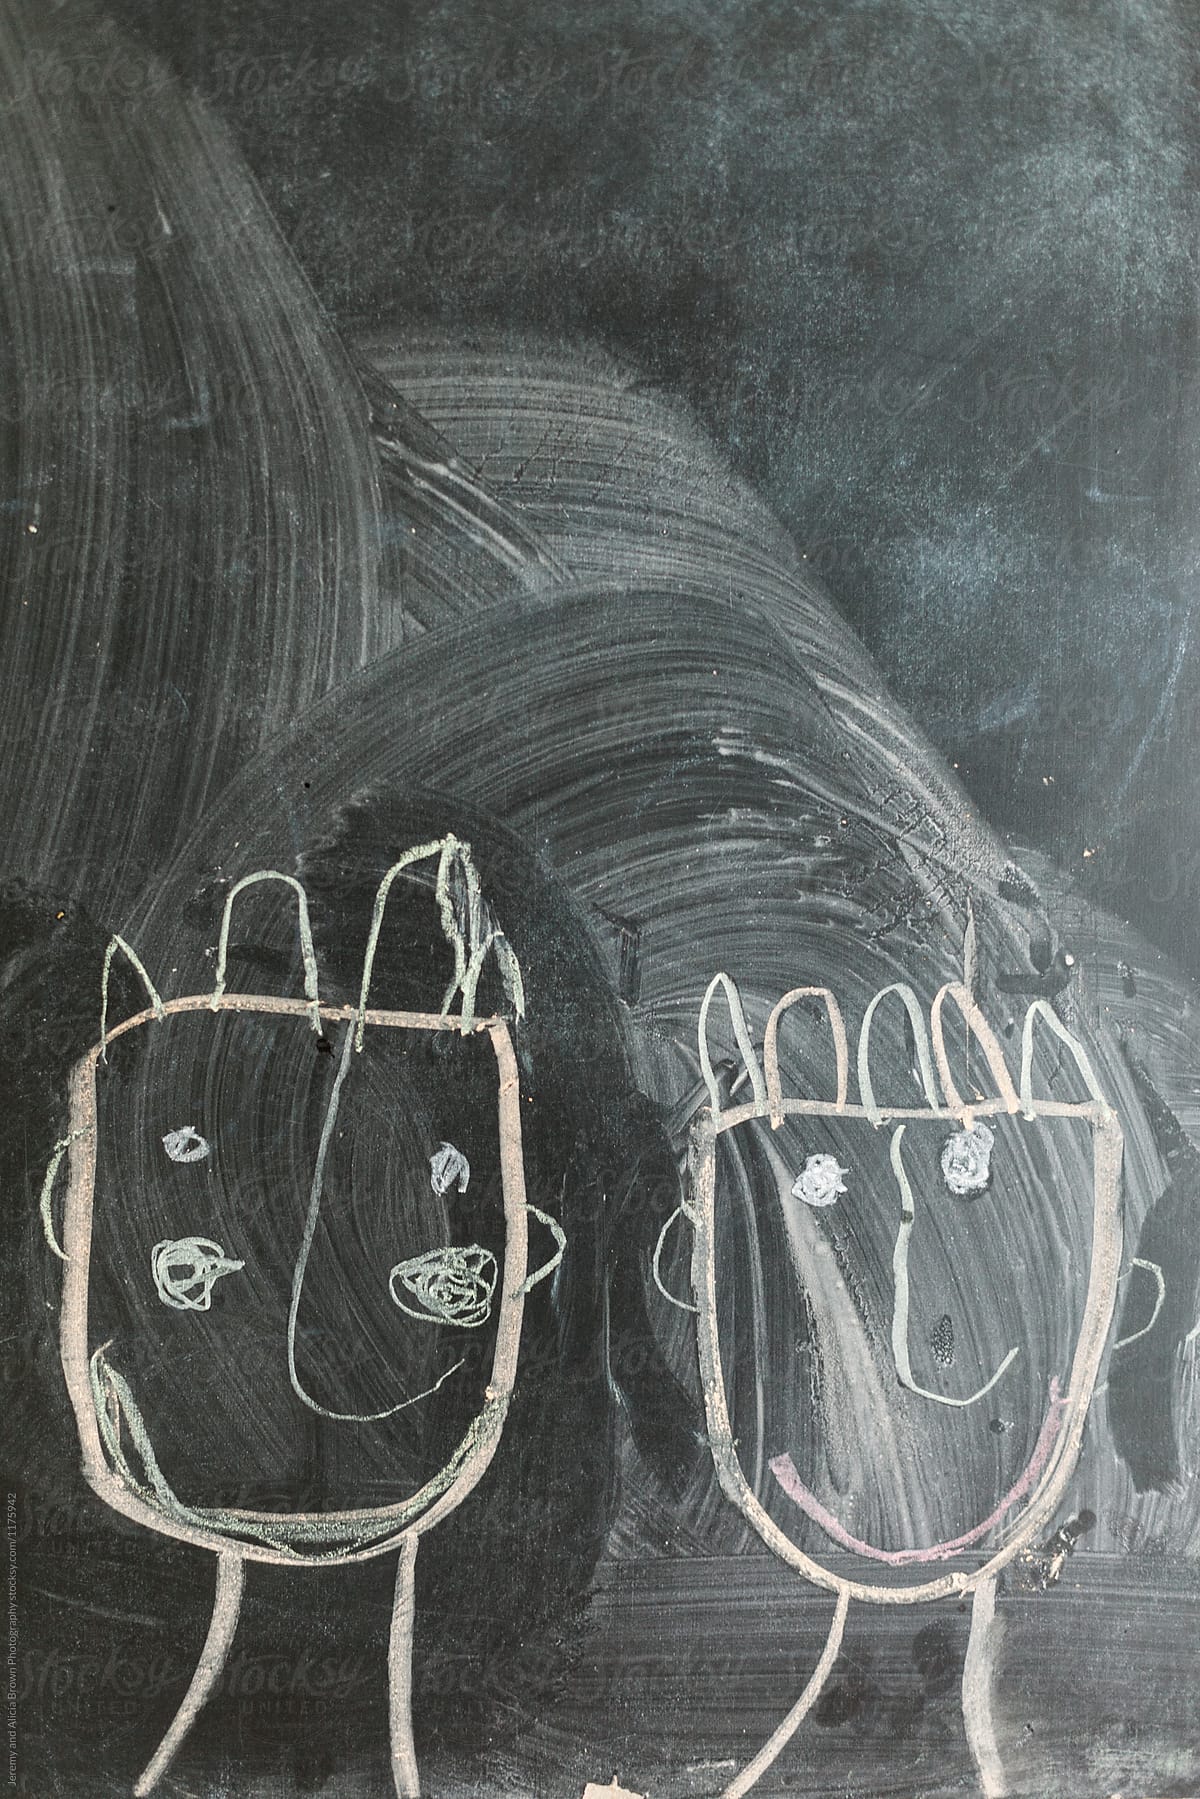 Child's chalkboard drawing of two people